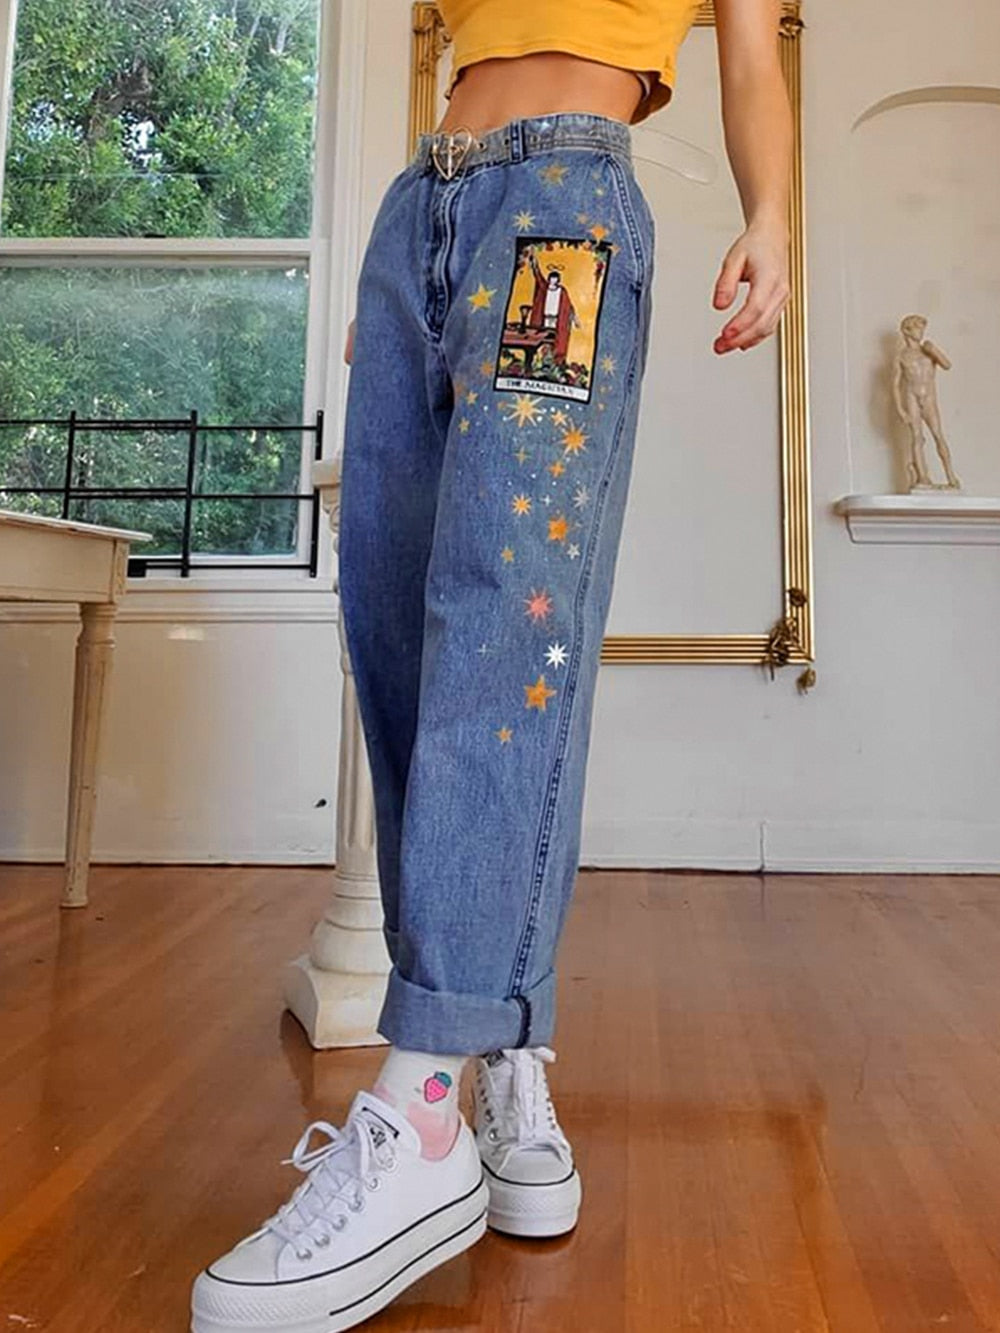 Womens Jeans Star Cartoons Pattern Printed Denim Trousers fit Young Girl Vintage Cute female Jeans Pant Blue